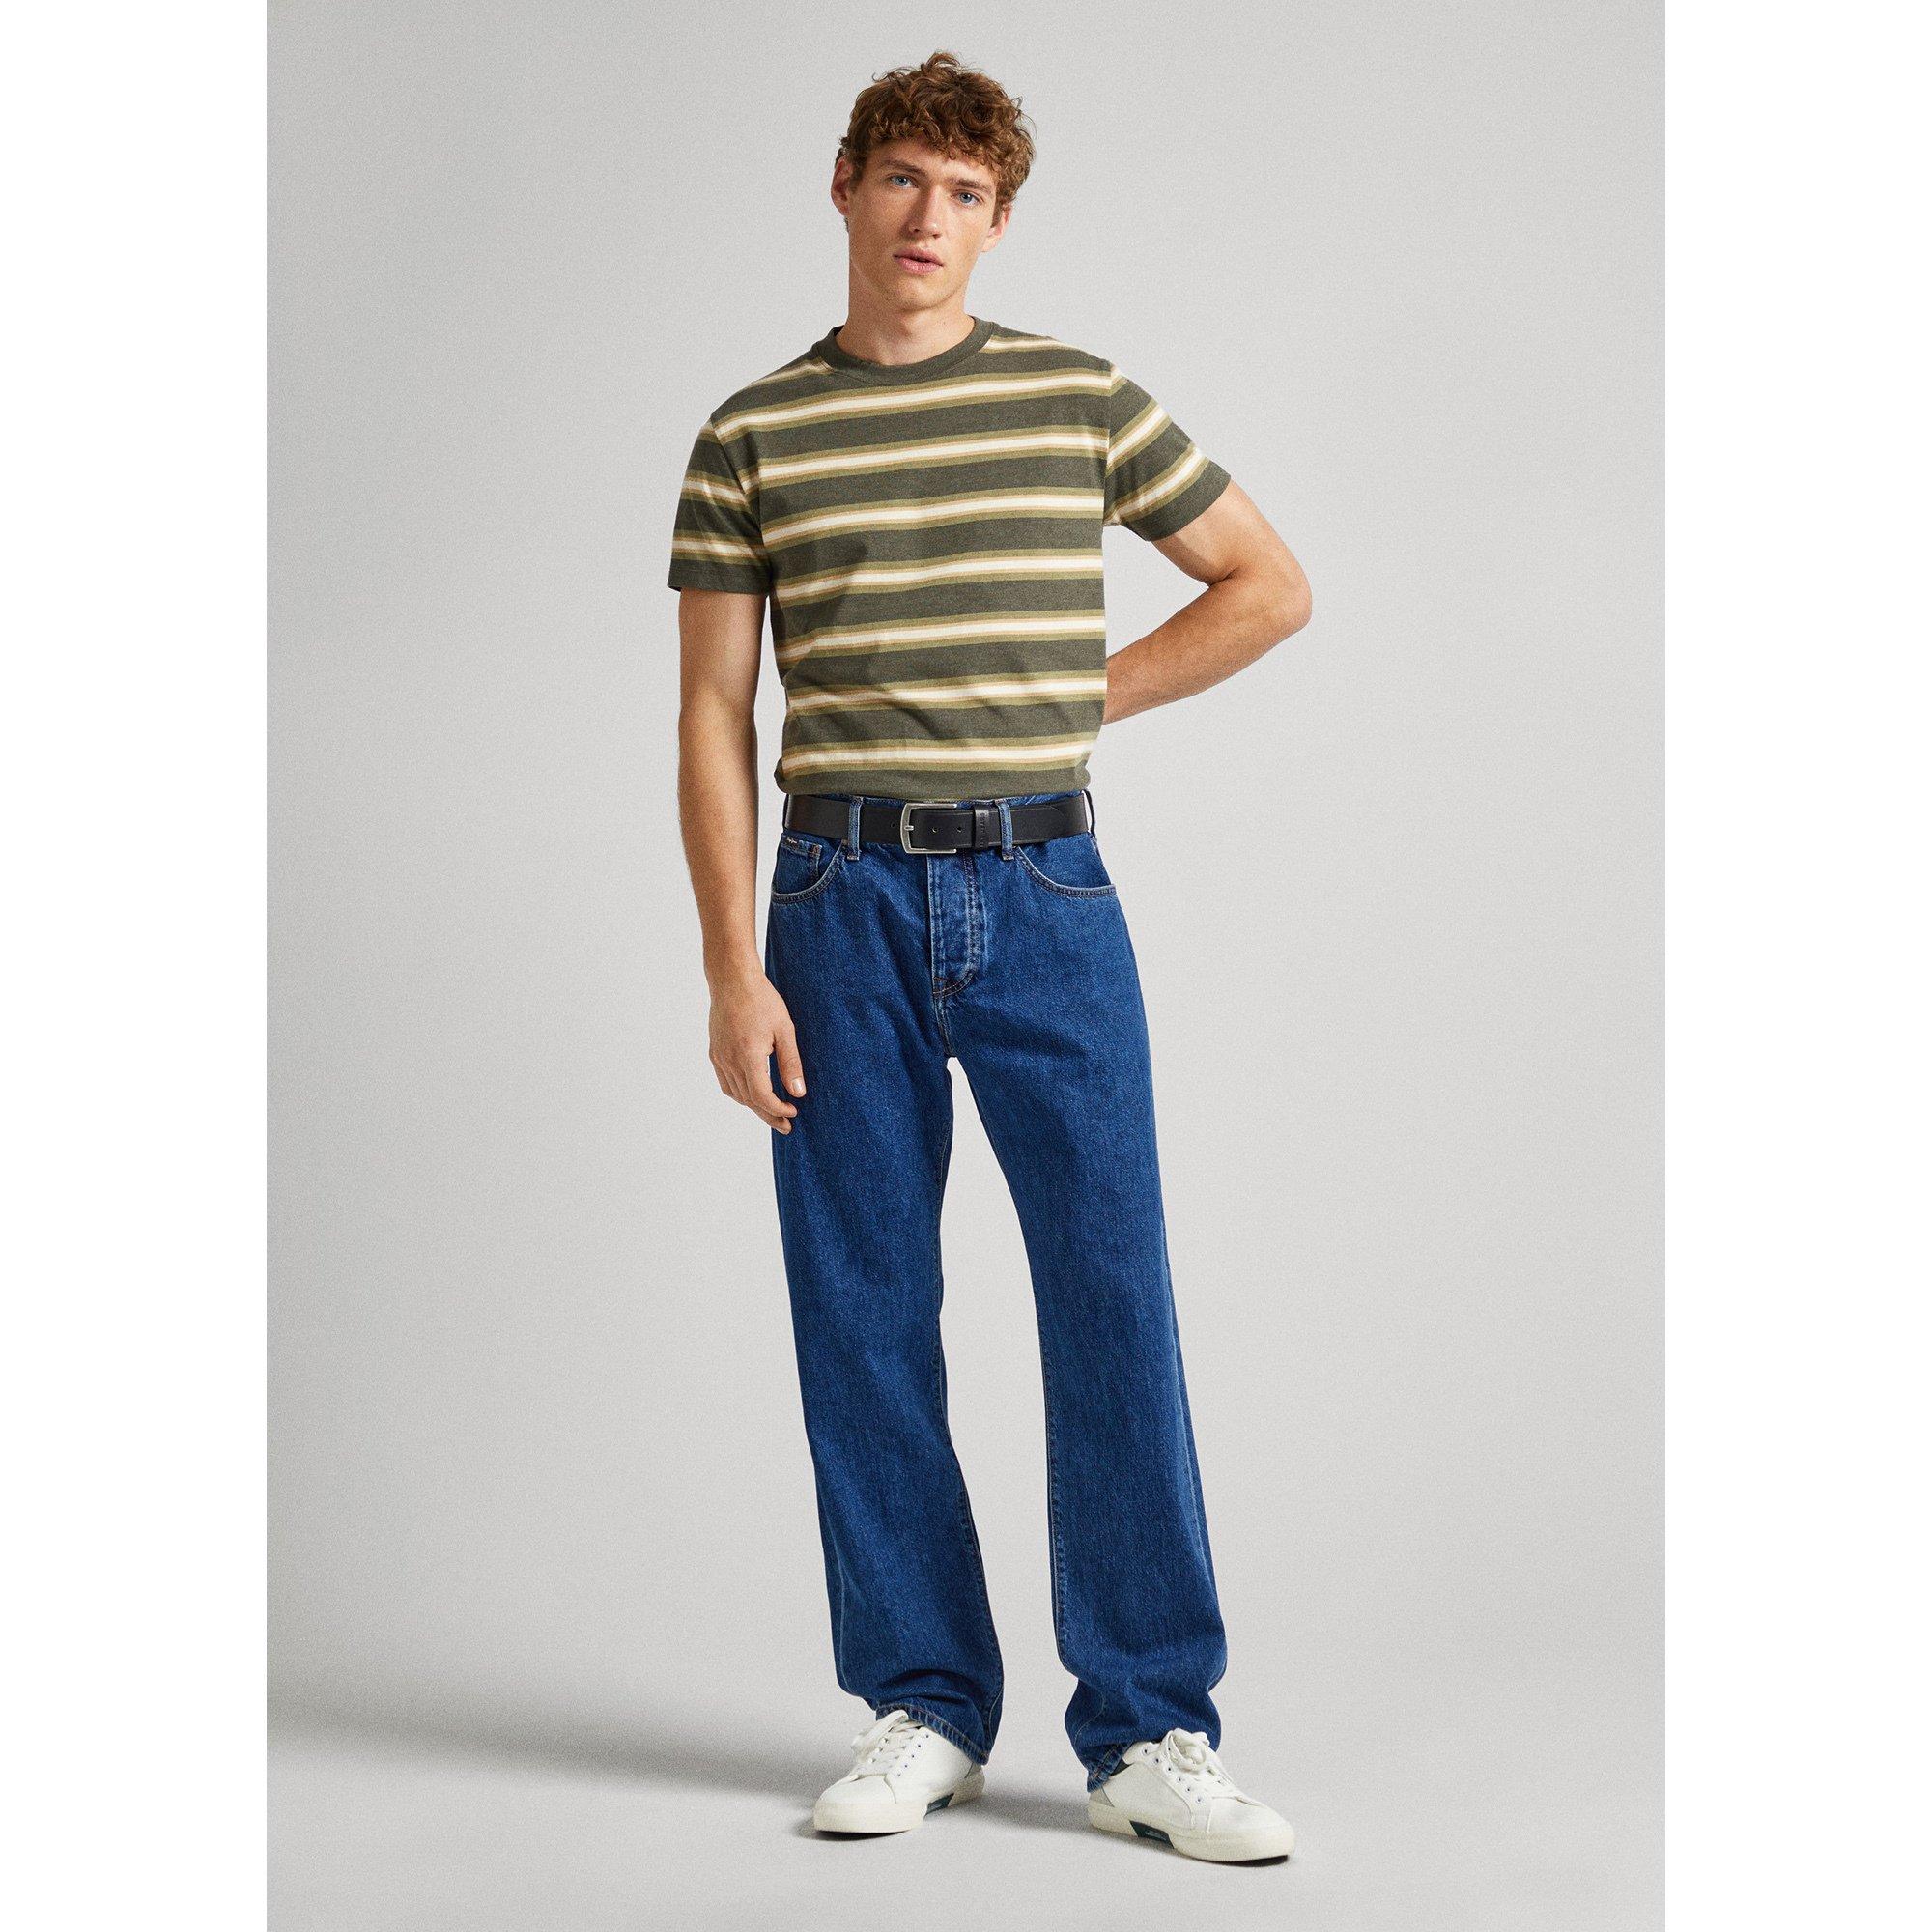 Pepe Jeans CHARN T-Shirt 